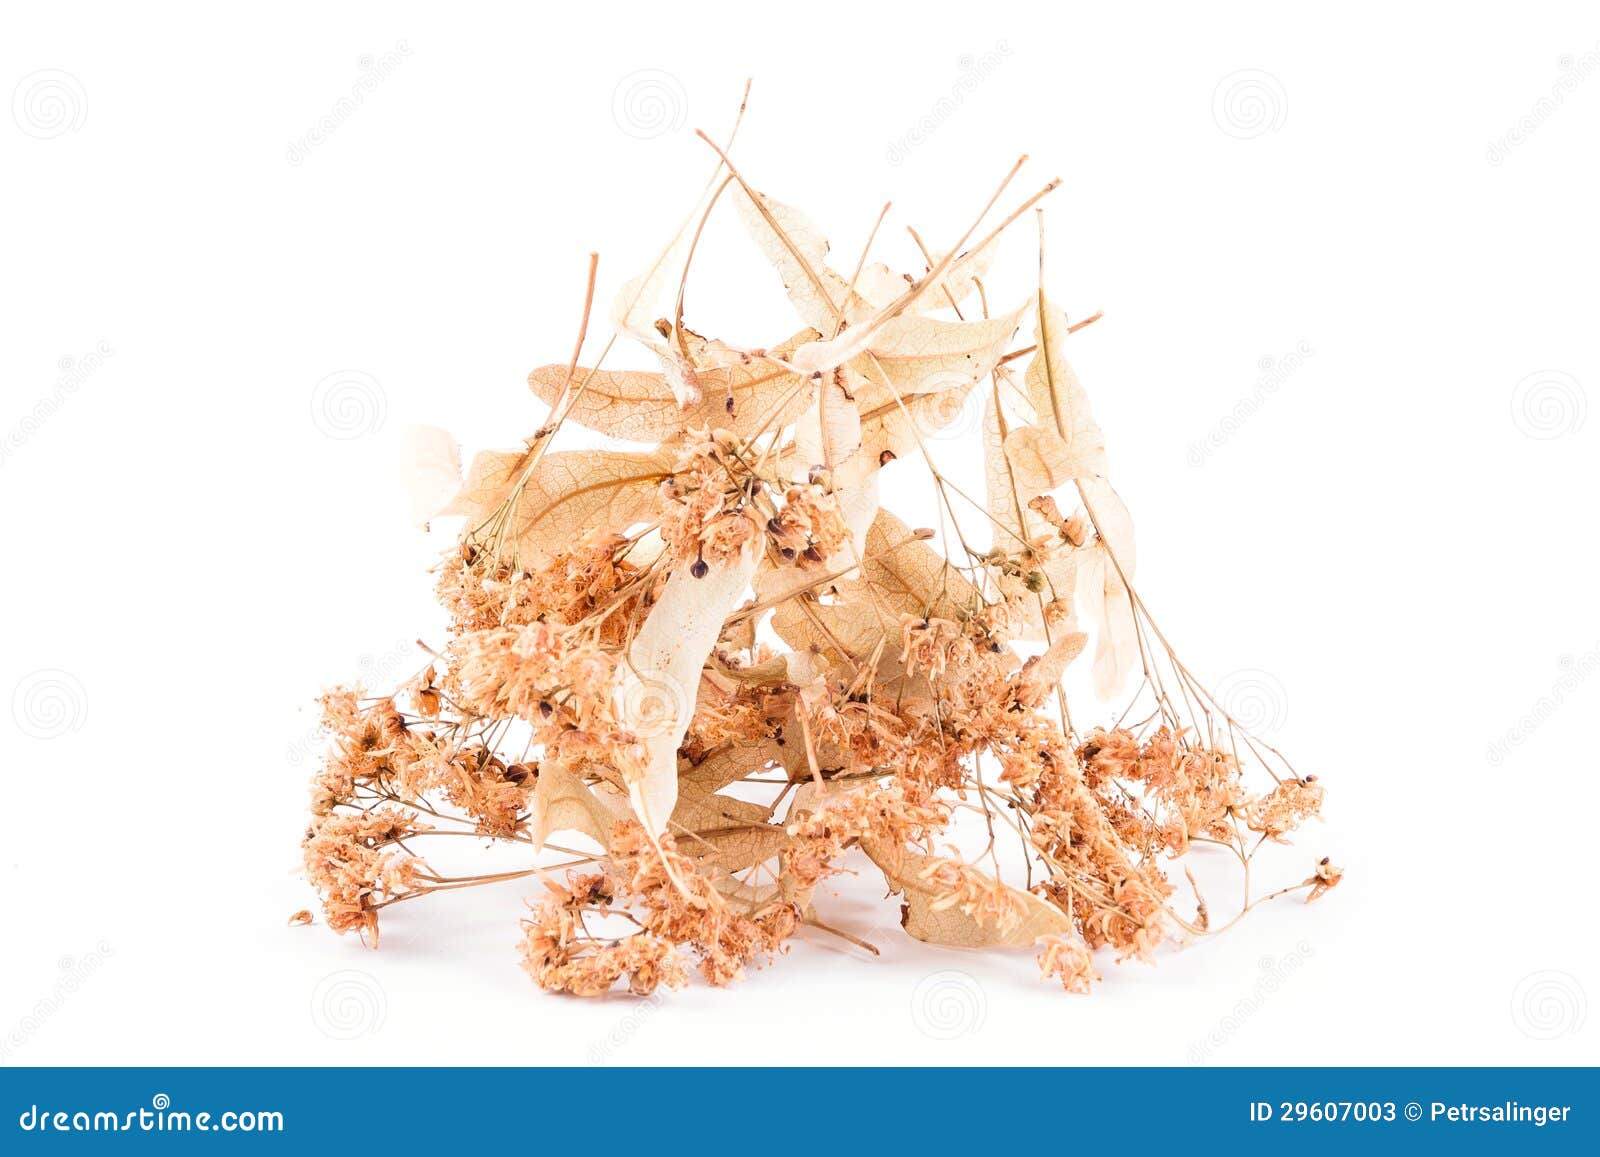 Dried linden flower stock image. Image of limetree, food - 29607003